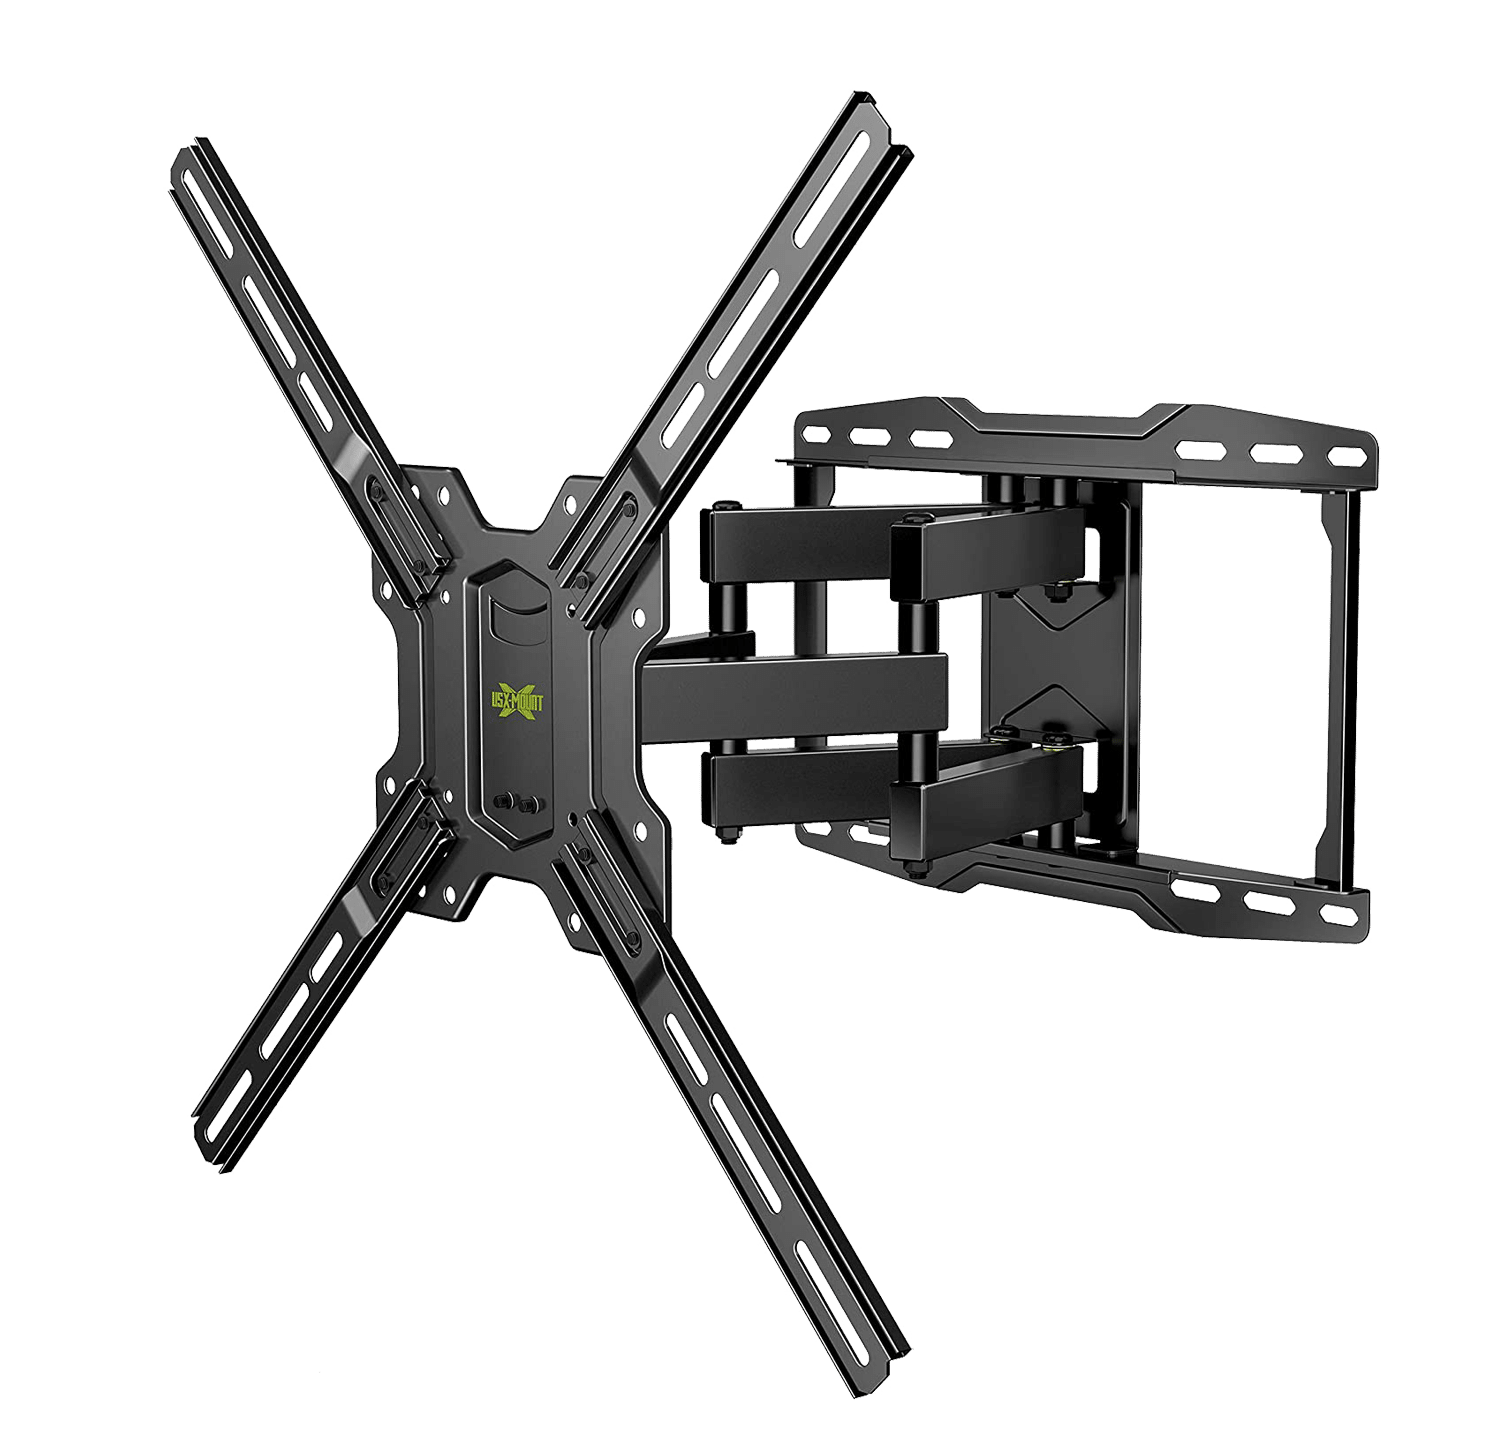 TV Center Design USX MOUNT Full Motion Pre-Assembled TV Wall Mount with Height Setting for Most 26-55 Inch TVs Wall Mount TV Bracket with Swivel Tilt Extension Up to VESA 400x400mm and 80 lbs 